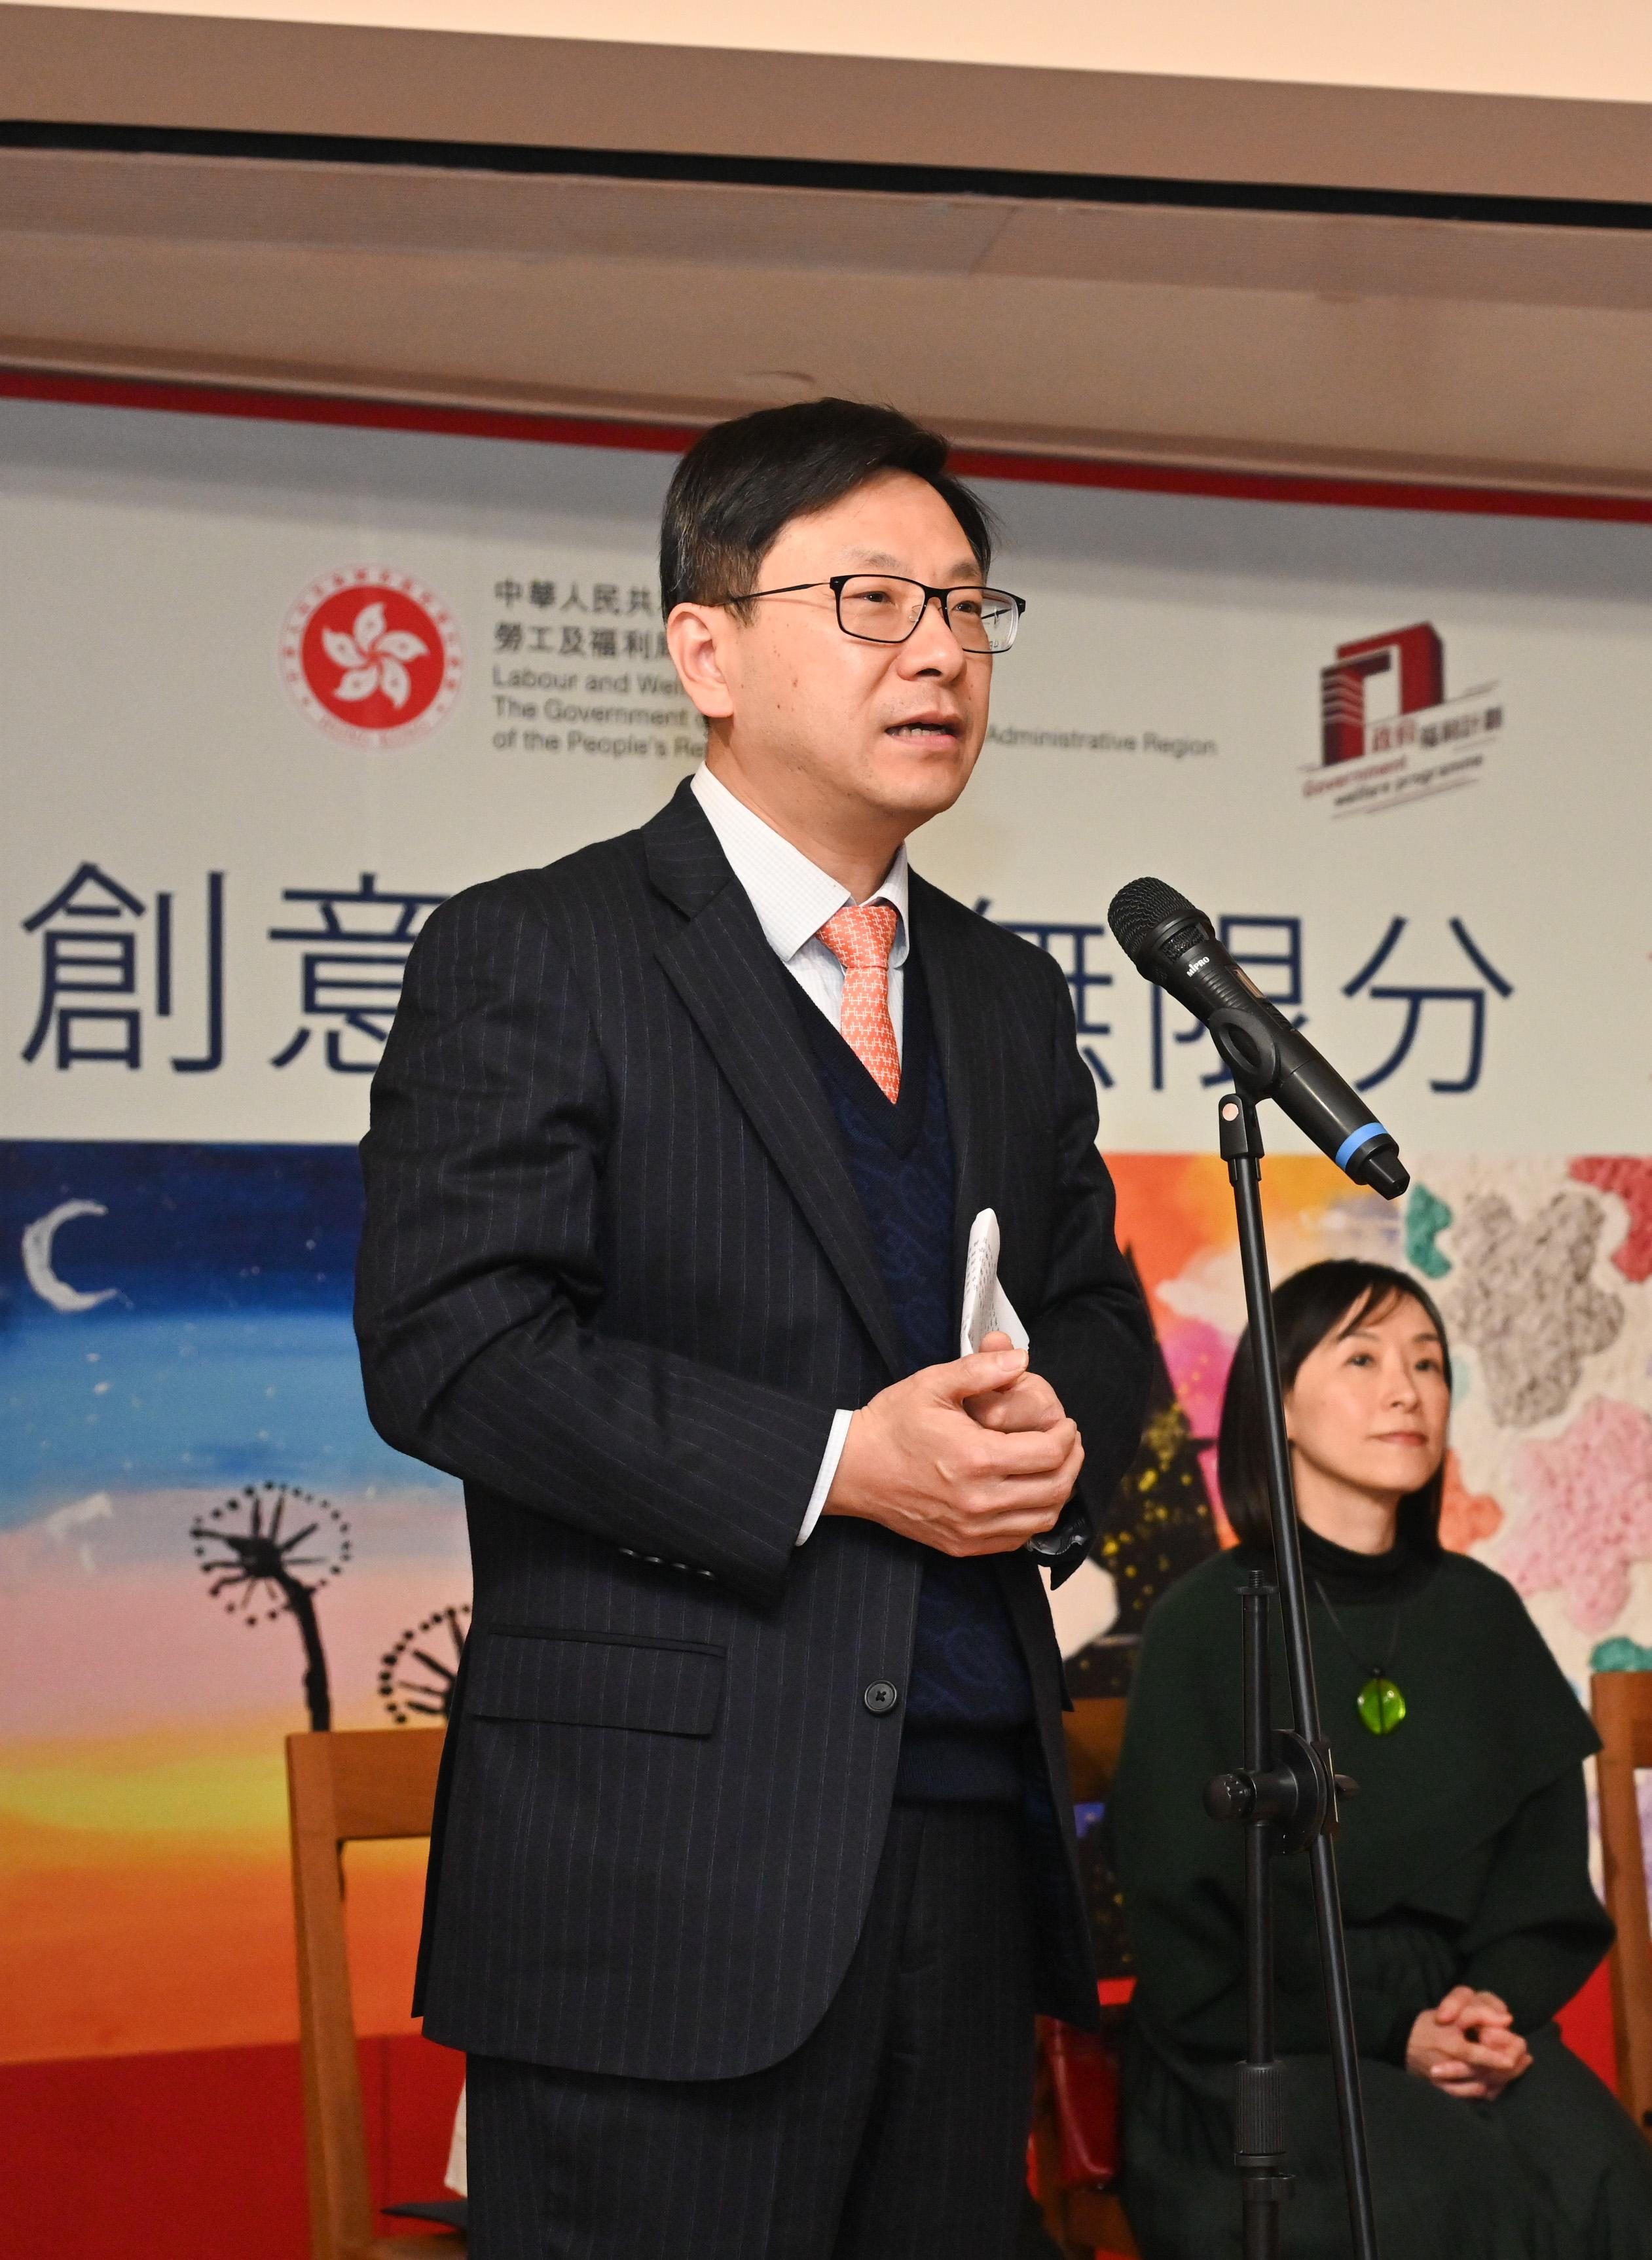 The Opening Ceremony of the "Infinite Creativity in Art" Exhibition, jointly organised by the Labour and Welfare Bureau, the Social Welfare Department, the Arts Development Fund for Persons with Disabilities and Sun Museum, was held today (January 11). Photo shows the Secretary for Labour and Welfare, Mr Chris Sun, addressing the opening ceremony.